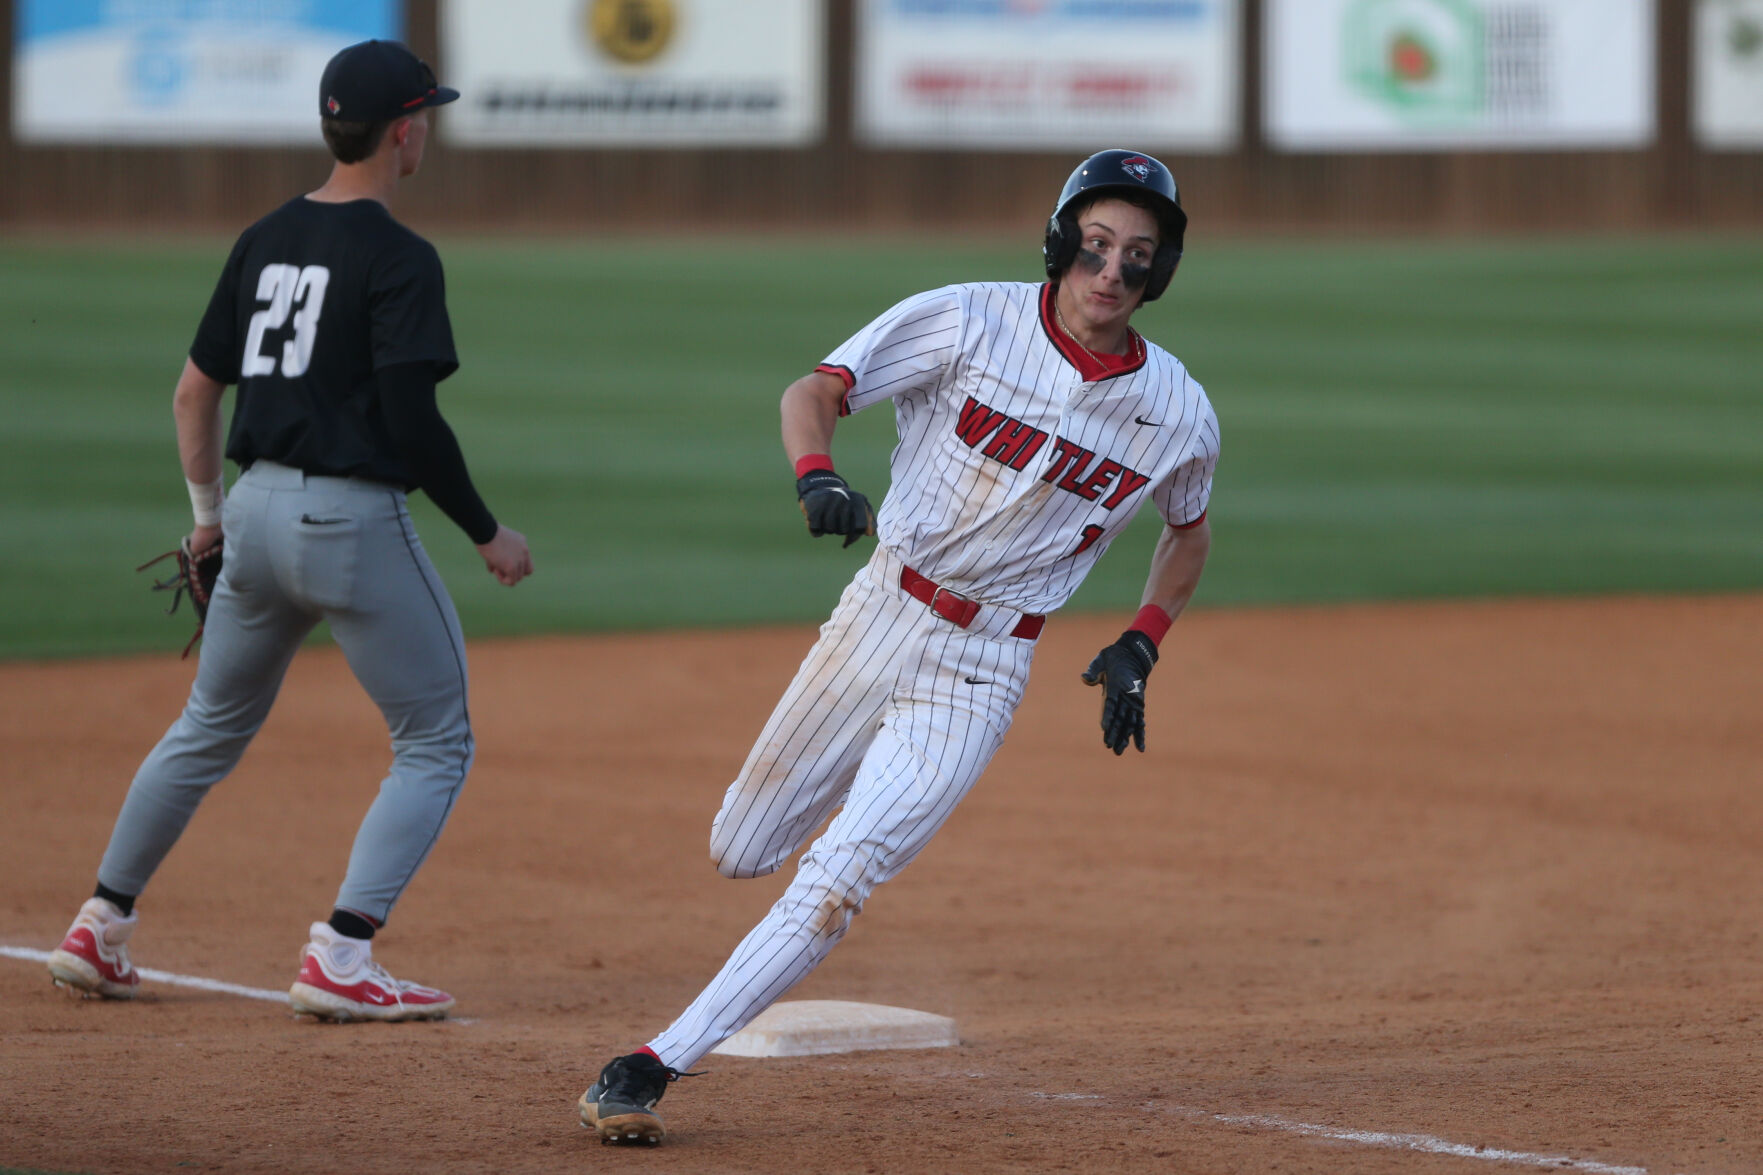 Whitley County’s win streak reaches three games with 8-4 win over Russell County